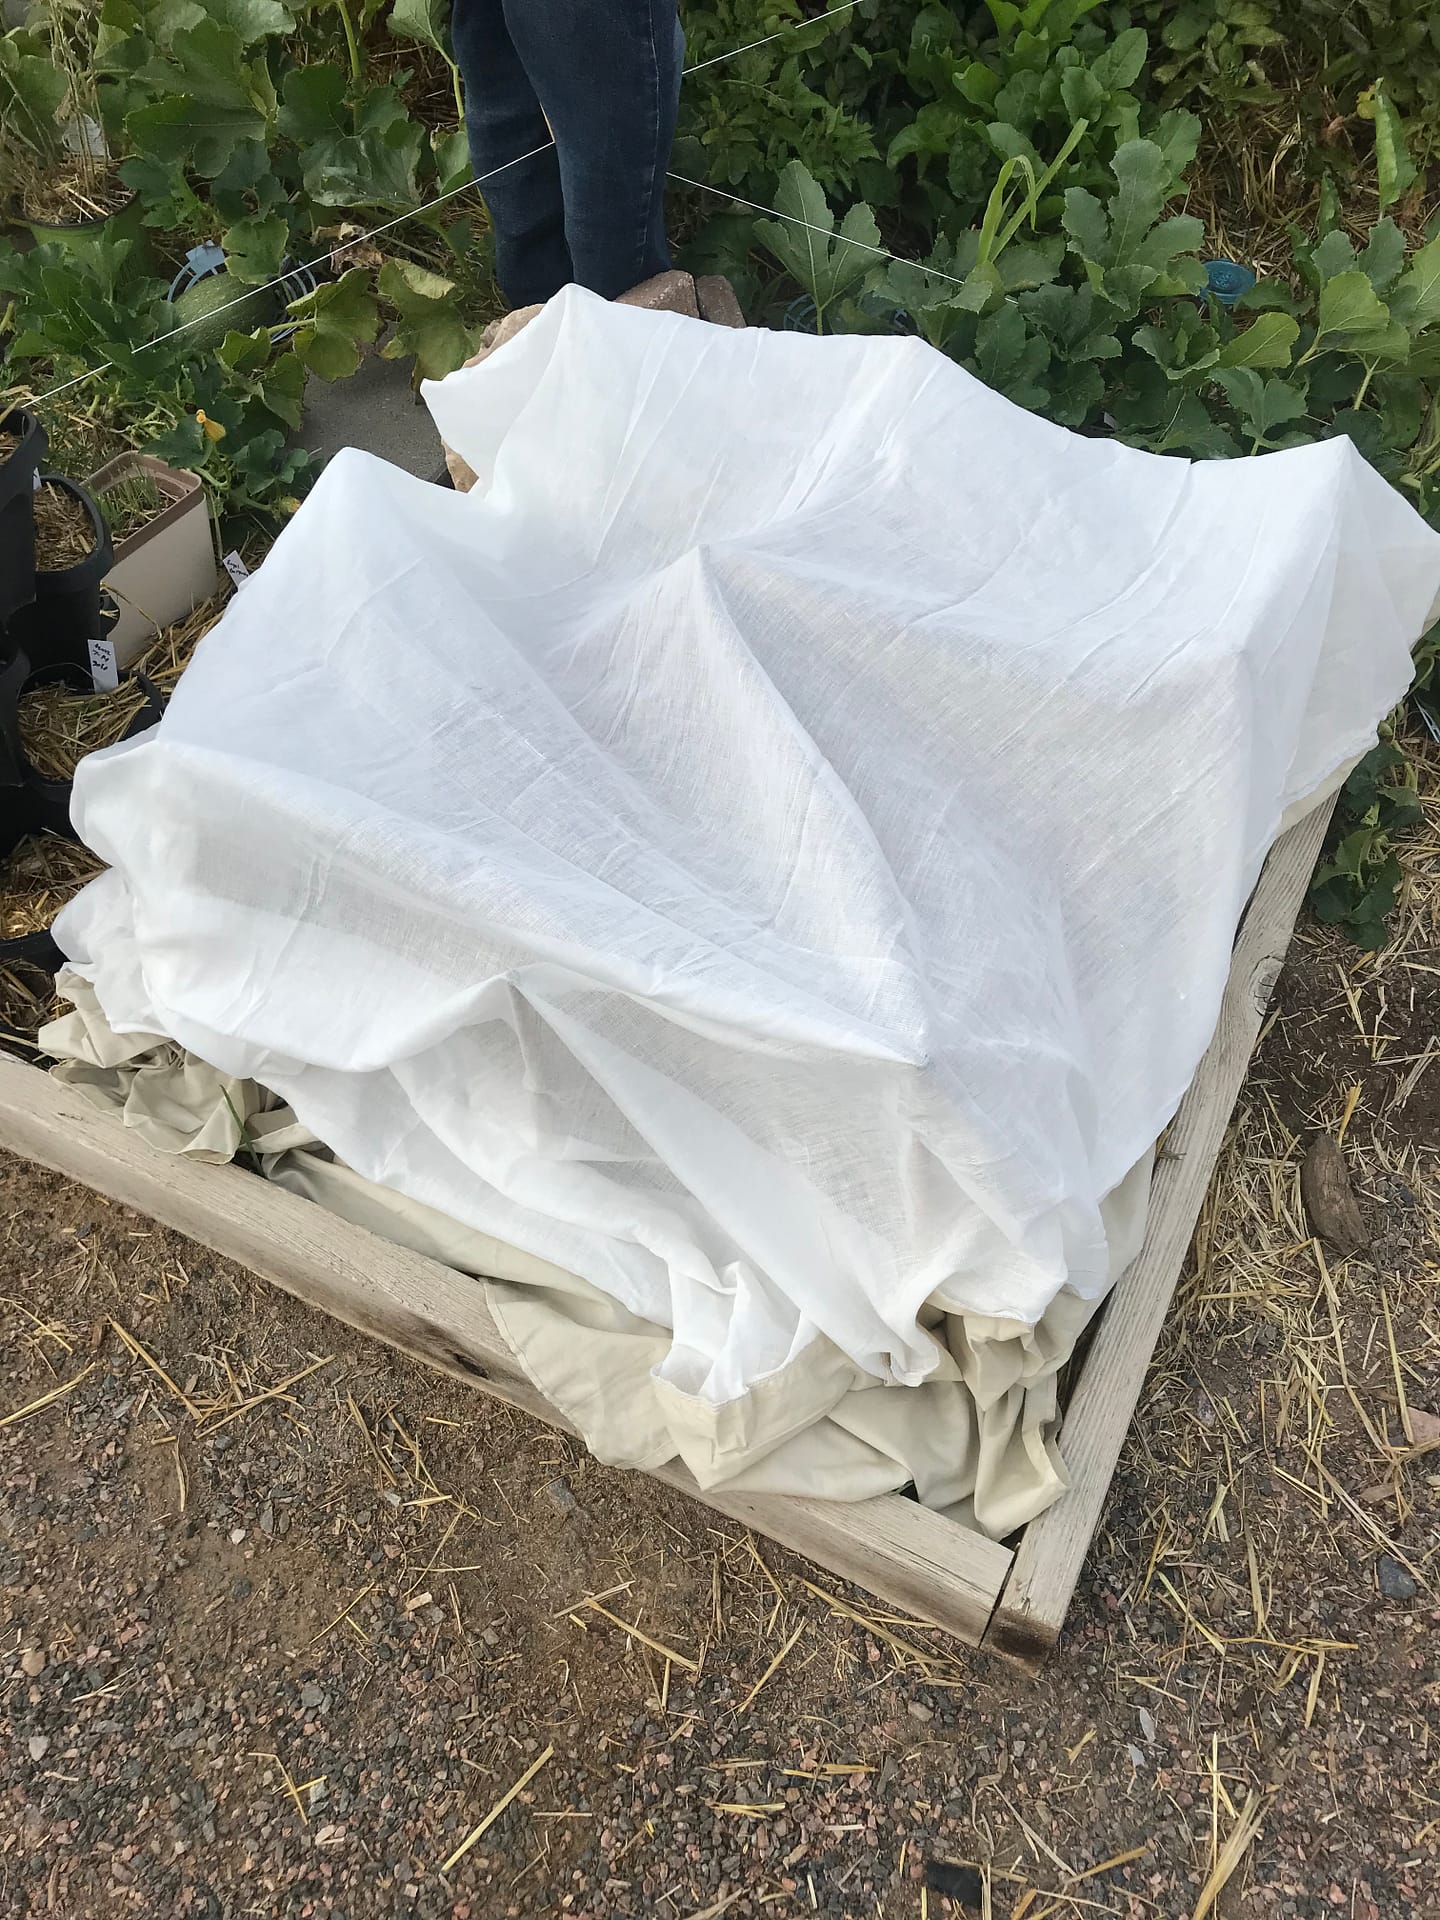 Angie's recipe garden shows how to use a bed skirt to cover crops, could also provide shade to tomatoes